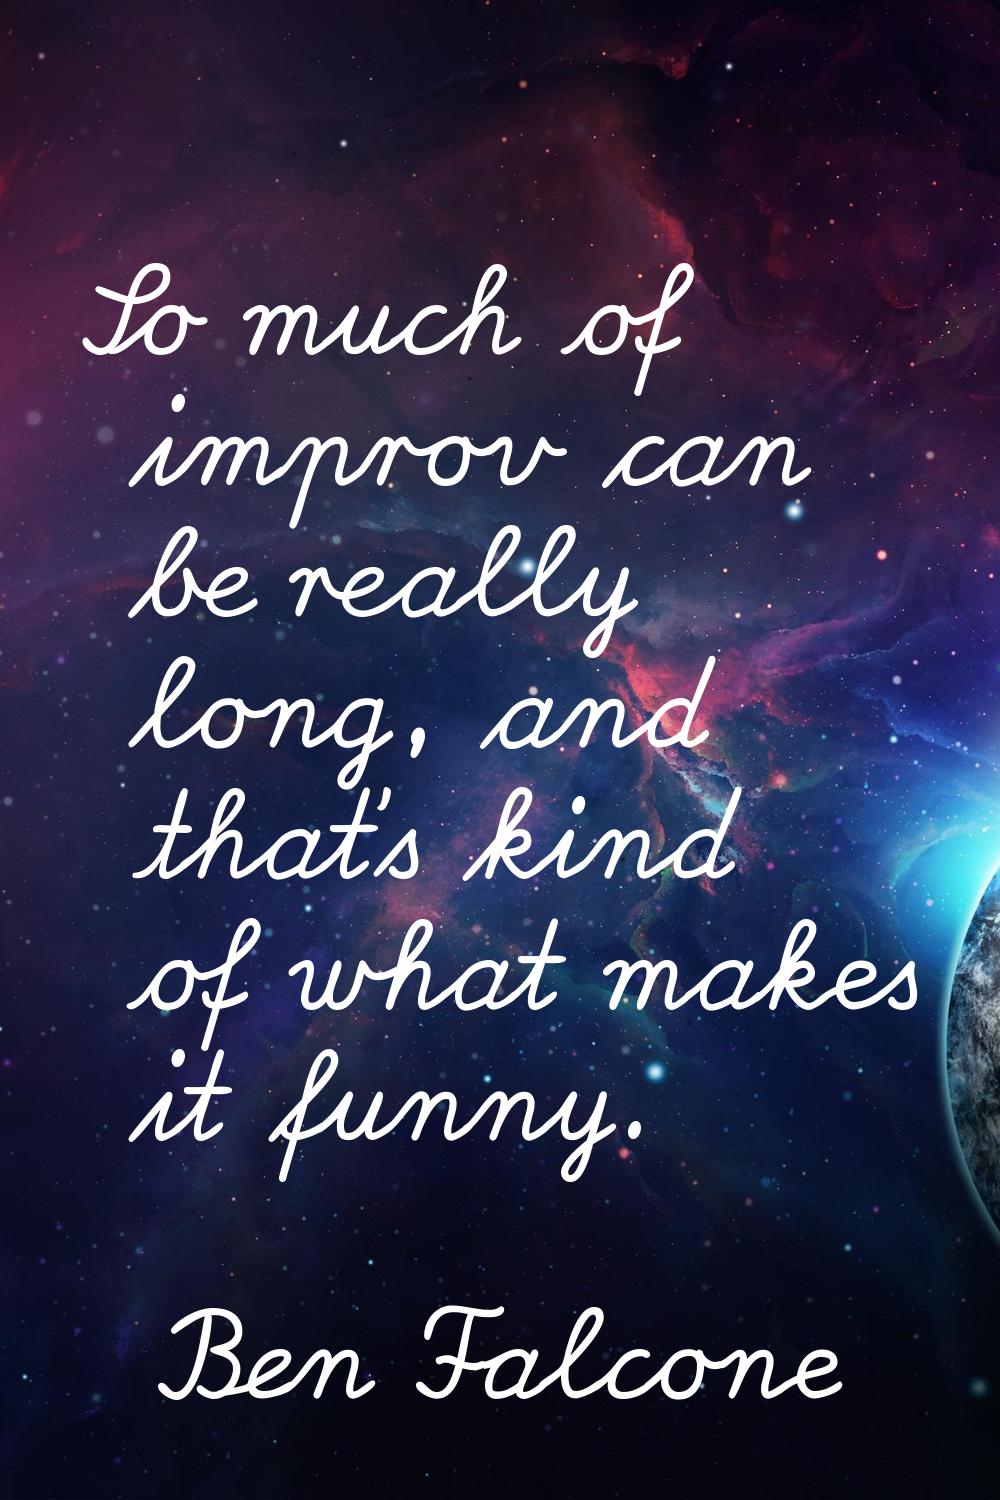 So much of improv can be really long, and that's kind of what makes it funny.